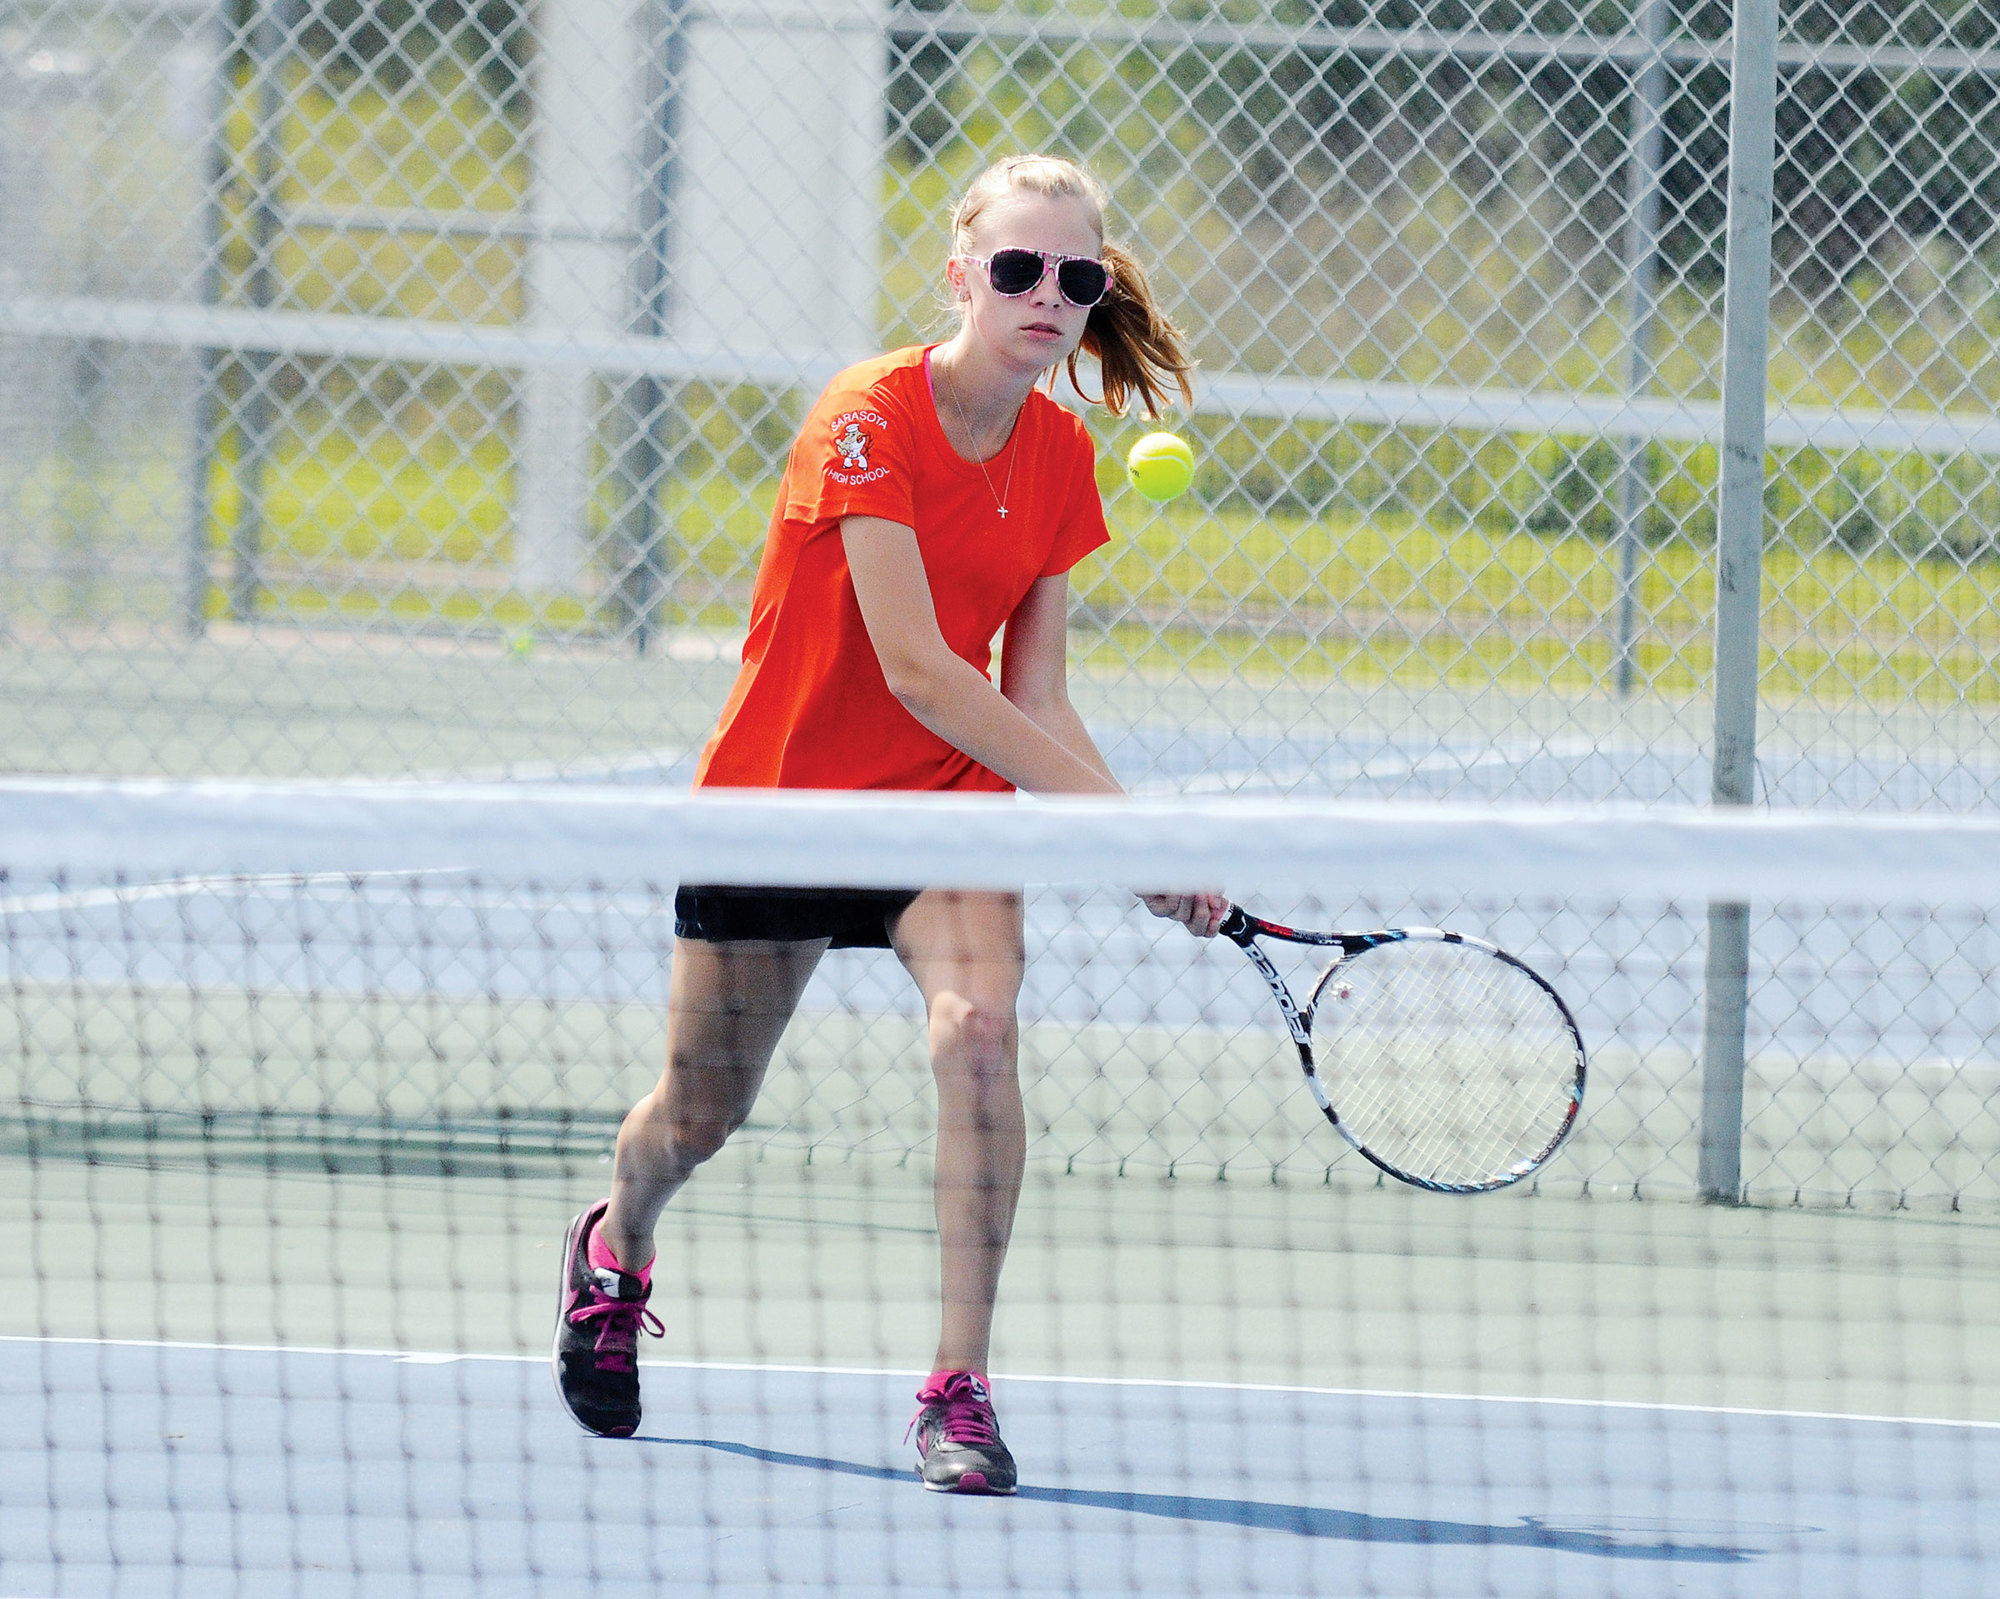 Sarasota’s Rose Davis warms up before the start of her No. 2 singles match March 24.